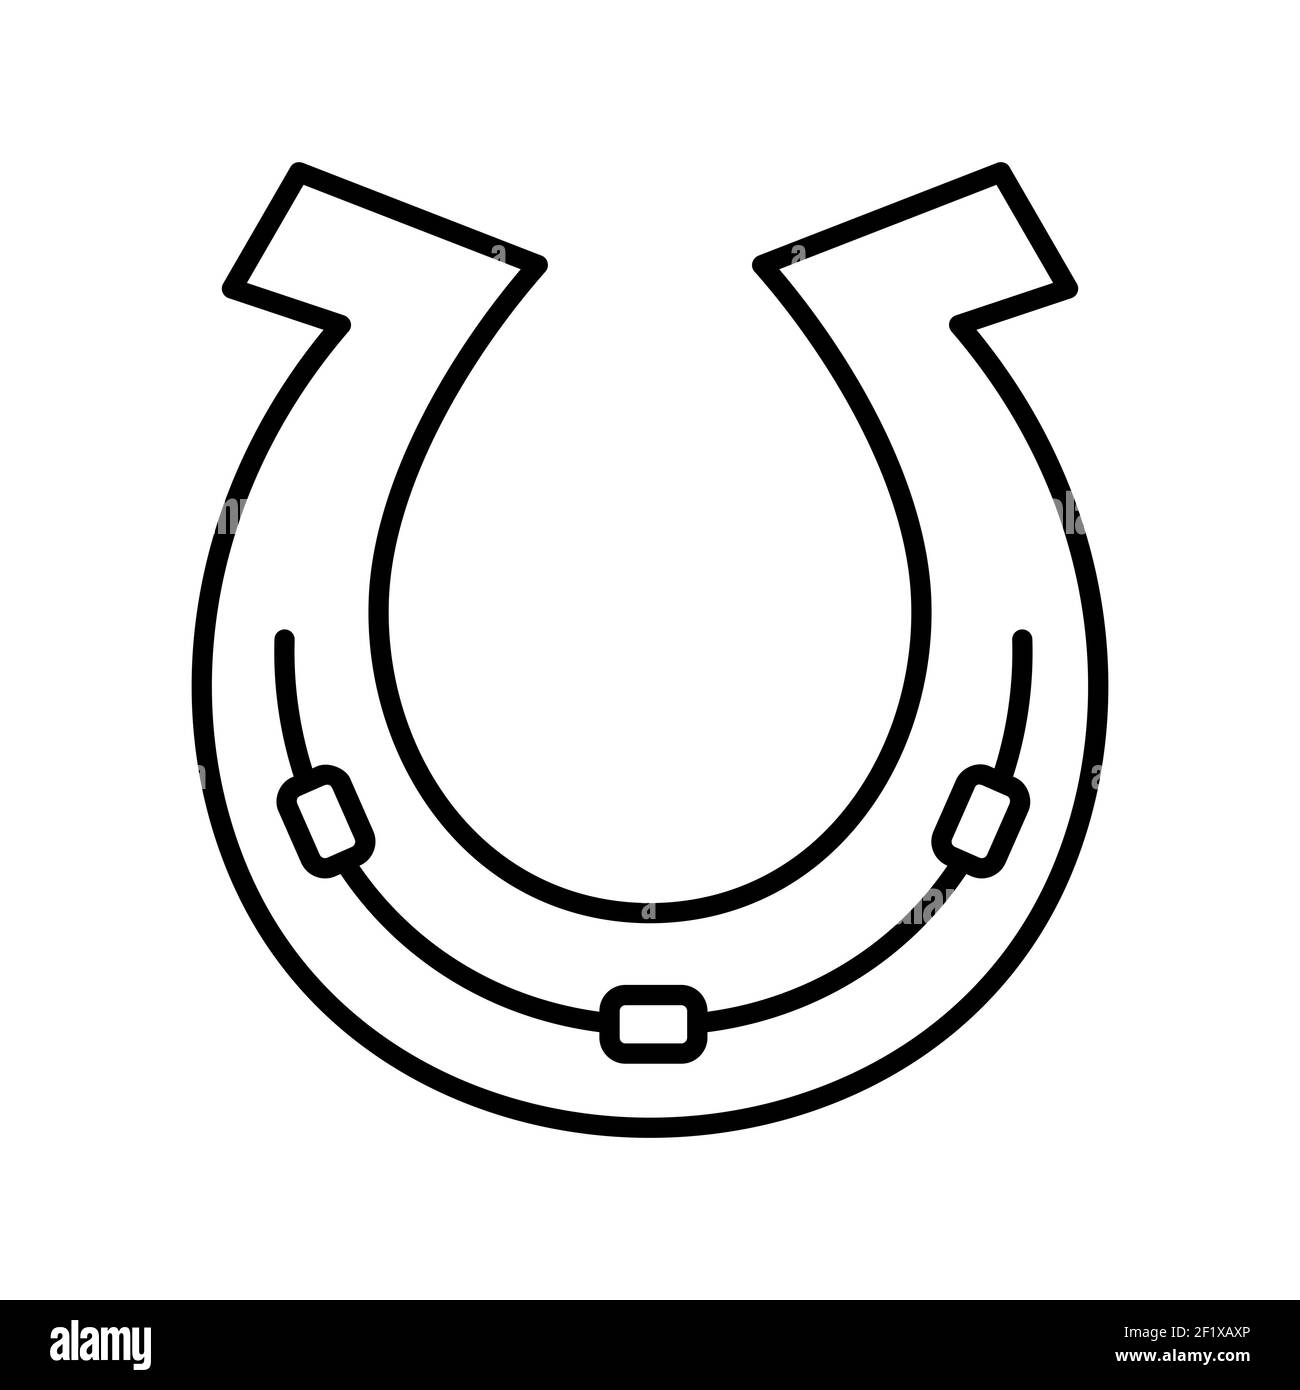 Horse shoe line drawing Cut Out Stock Images & Pictures - Alamy